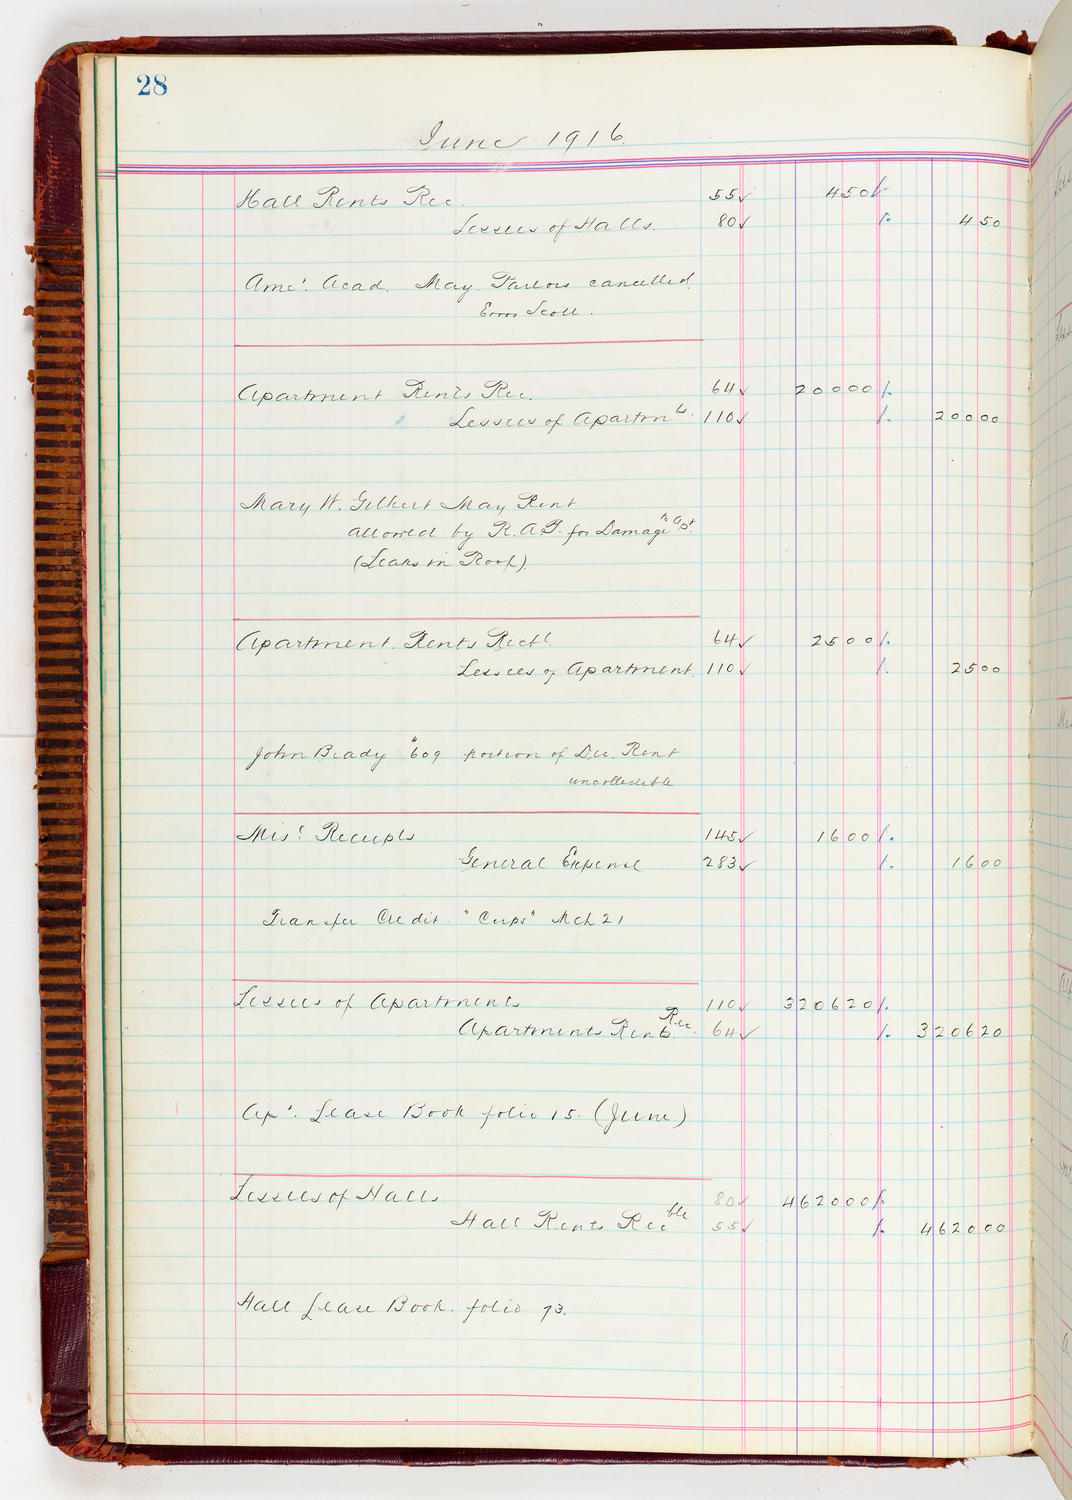 Music Hall Accounting Ledger, volume 5, page 28